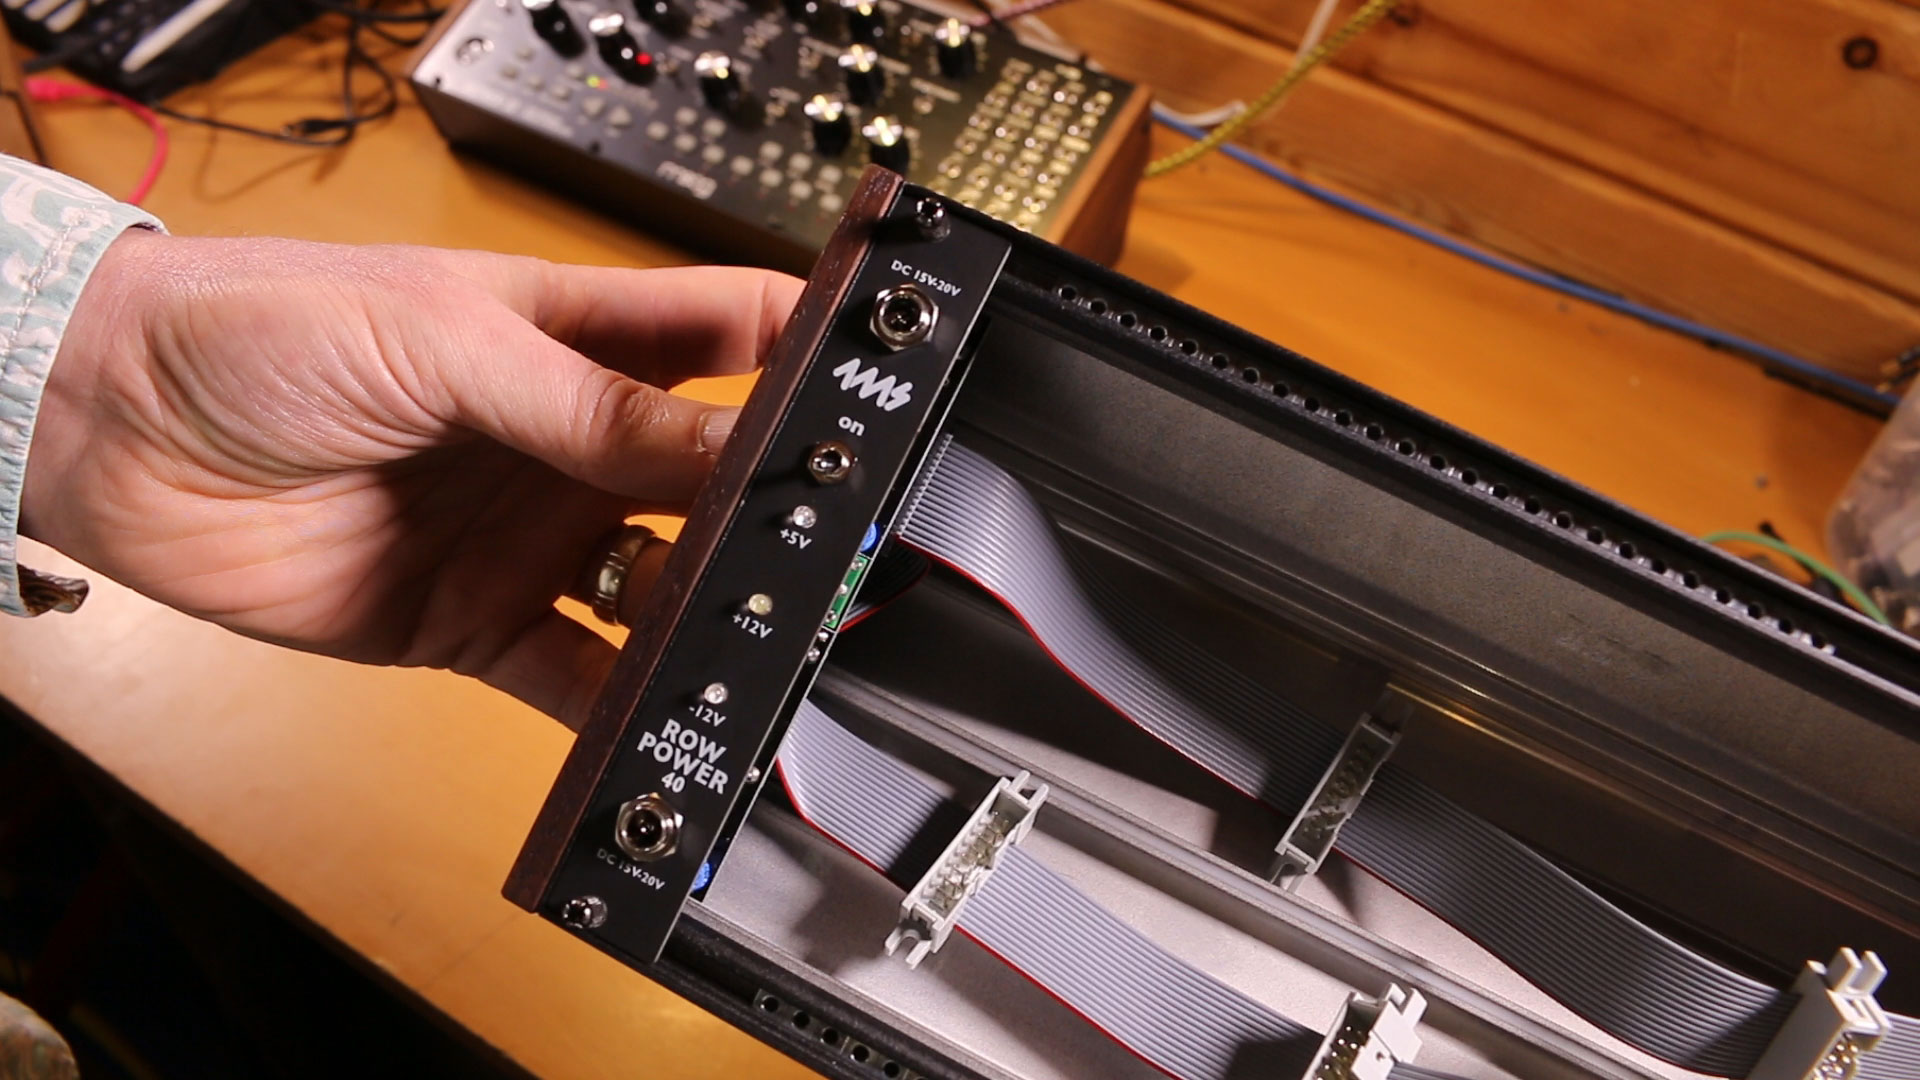 Installing the PSU into the Eurorack case